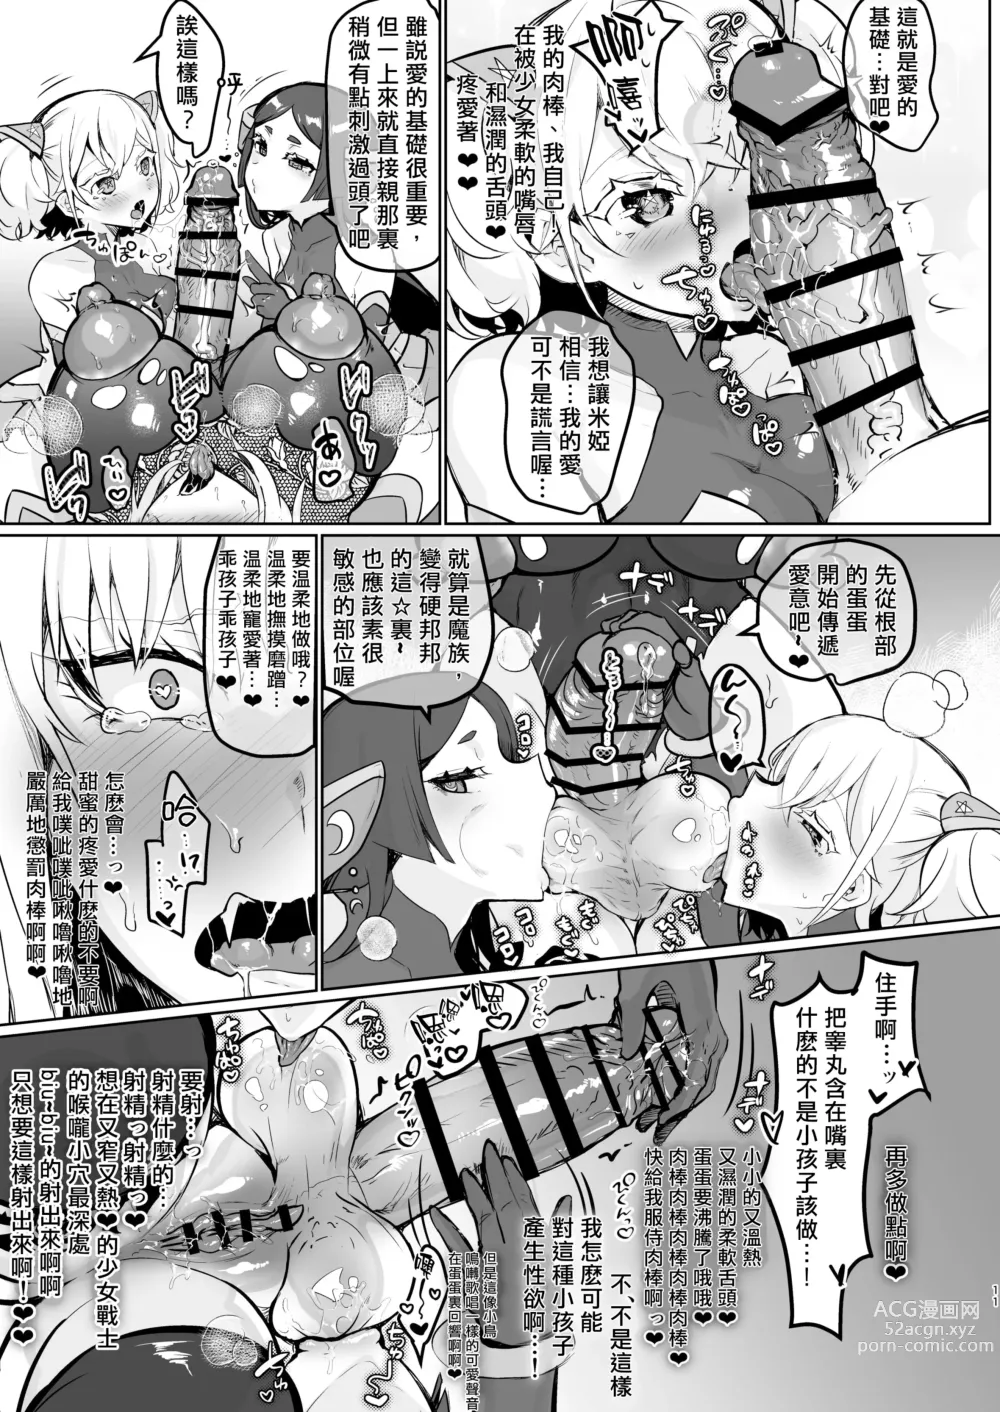 Page 11 of doujinshi 邪恶组织女干部正堕